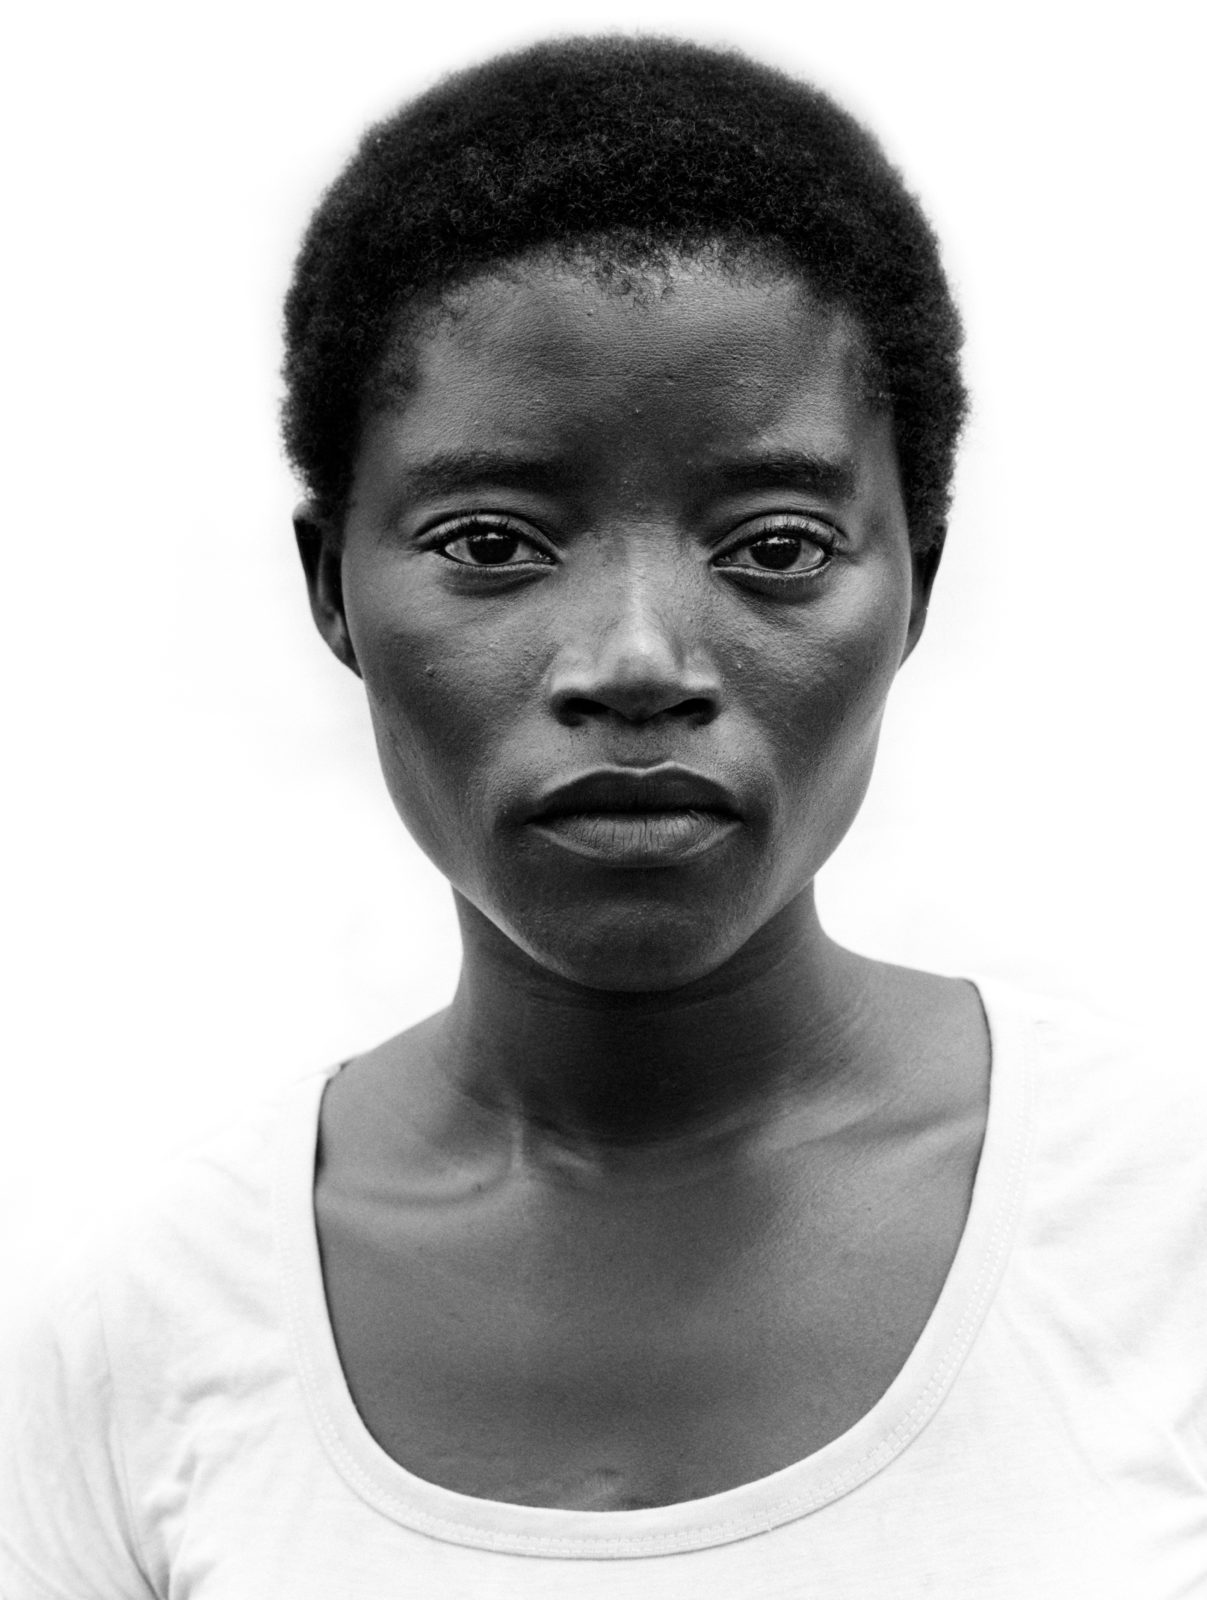 Germaine witnessed horrific violence in her home village in the Democratic Republic of the Congo before fleeing for her life. 'We had good land at home, a good life. Then the militias came and took everything. They killed my older brother.'